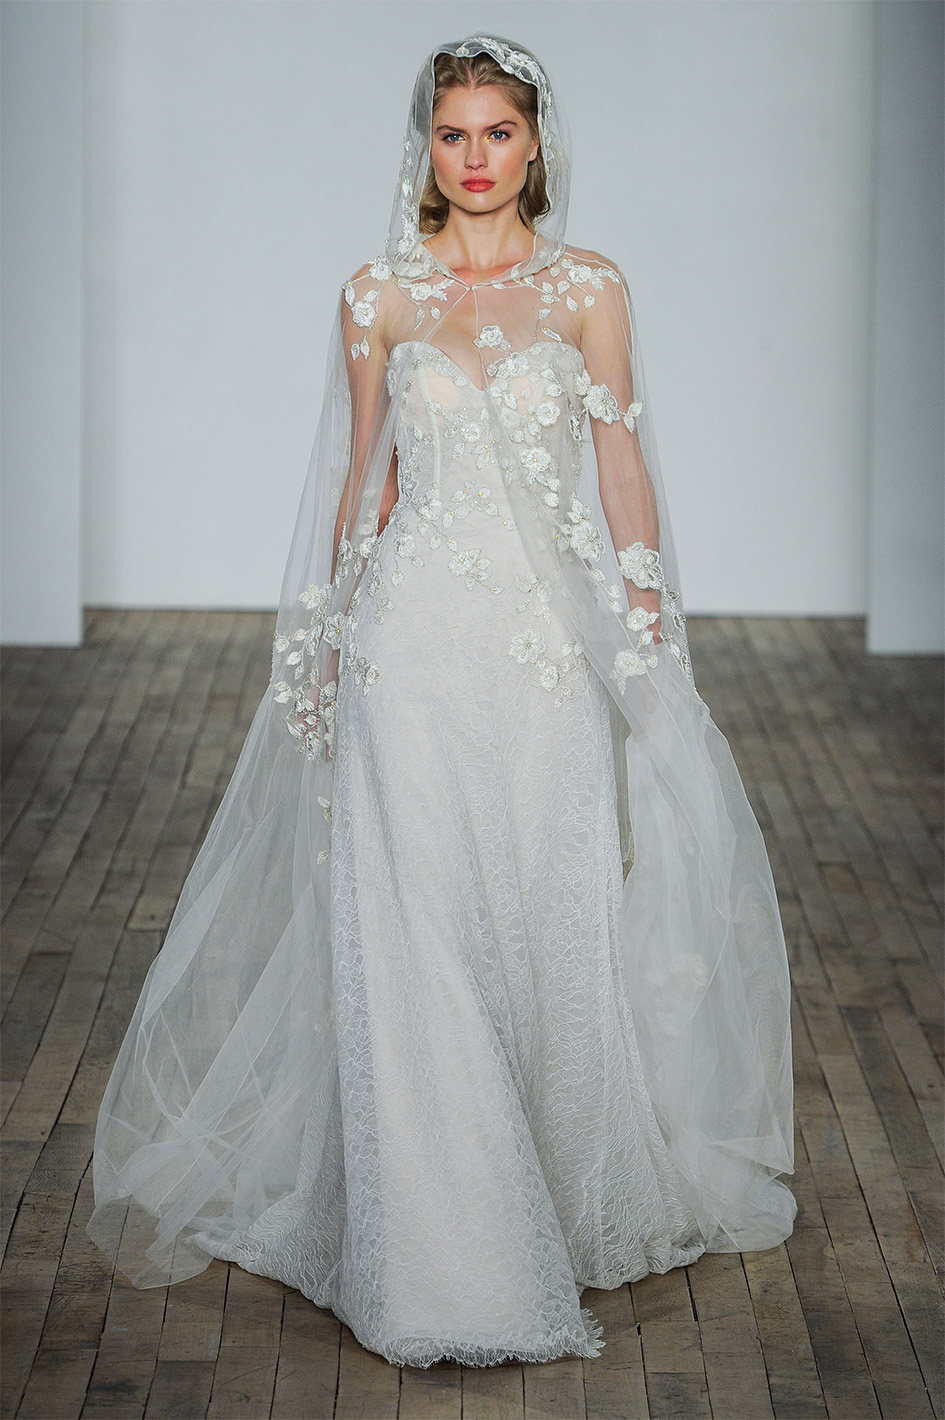 Details, Details: The Best And Most Beautiful Wedding Gown ...